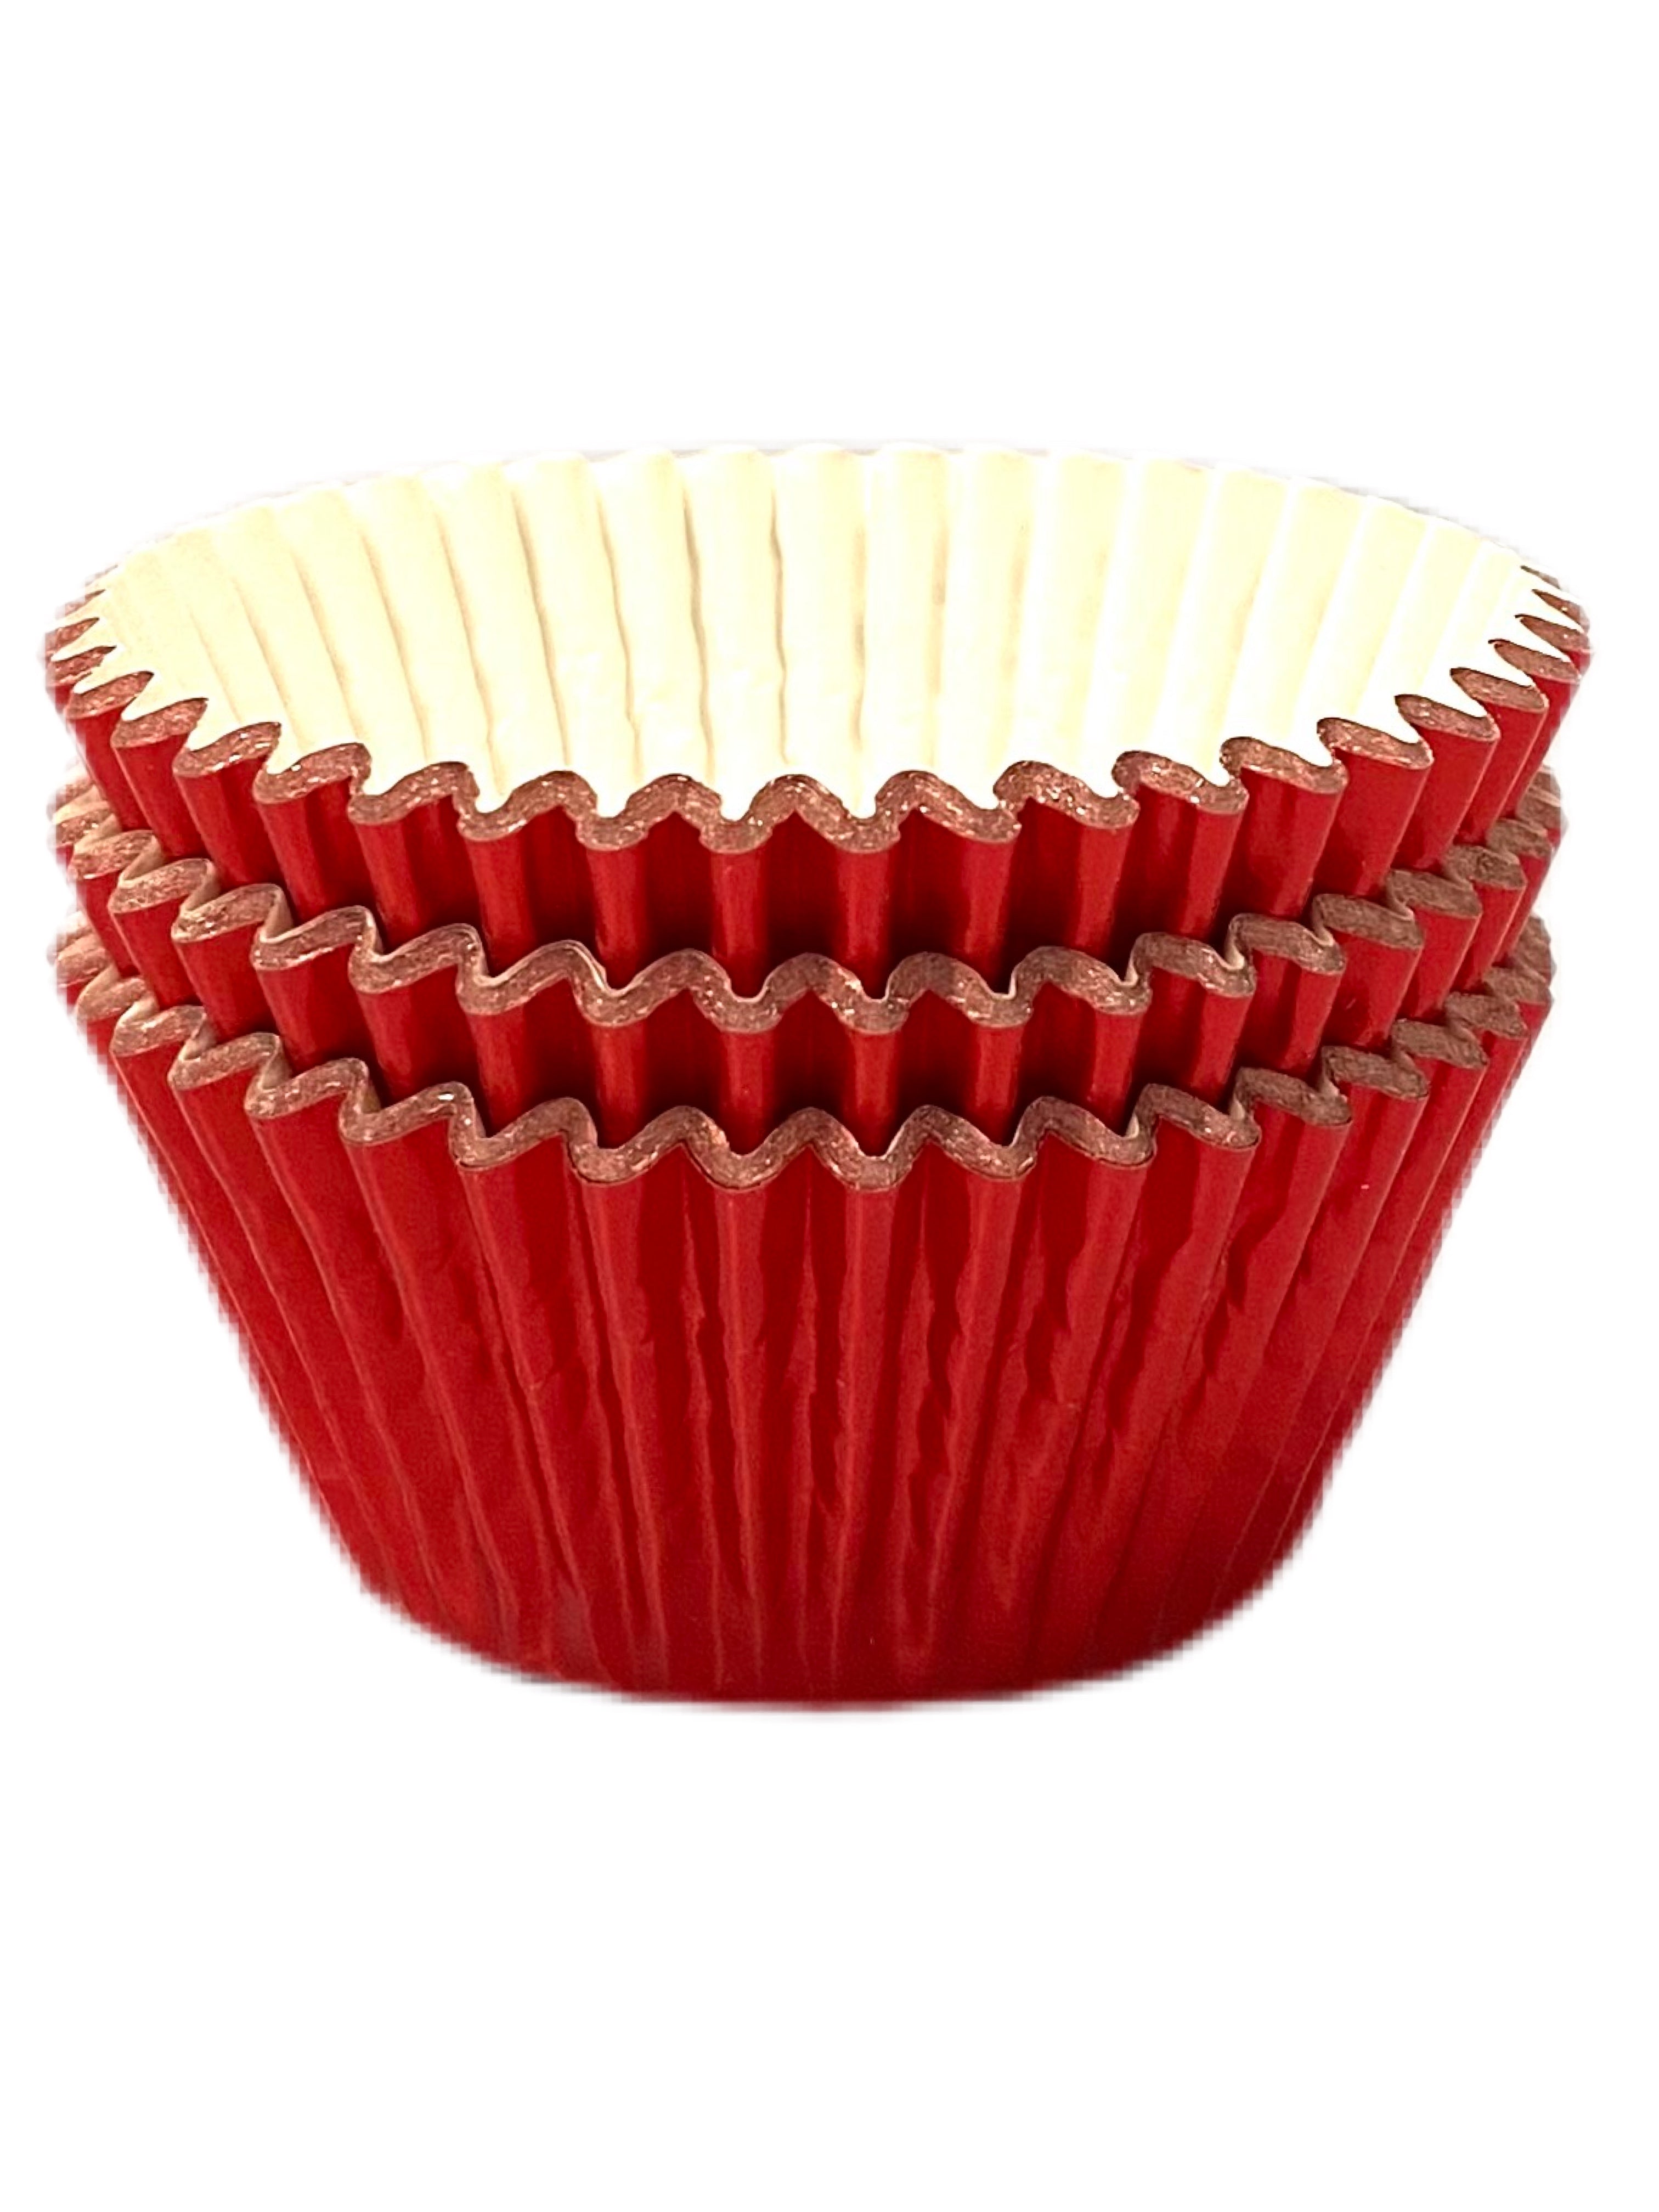 Red Muffin Cases, Red Foil Cupcake Baking Cases, foil muffin cases, foil cupcake cases, red cupcake cases